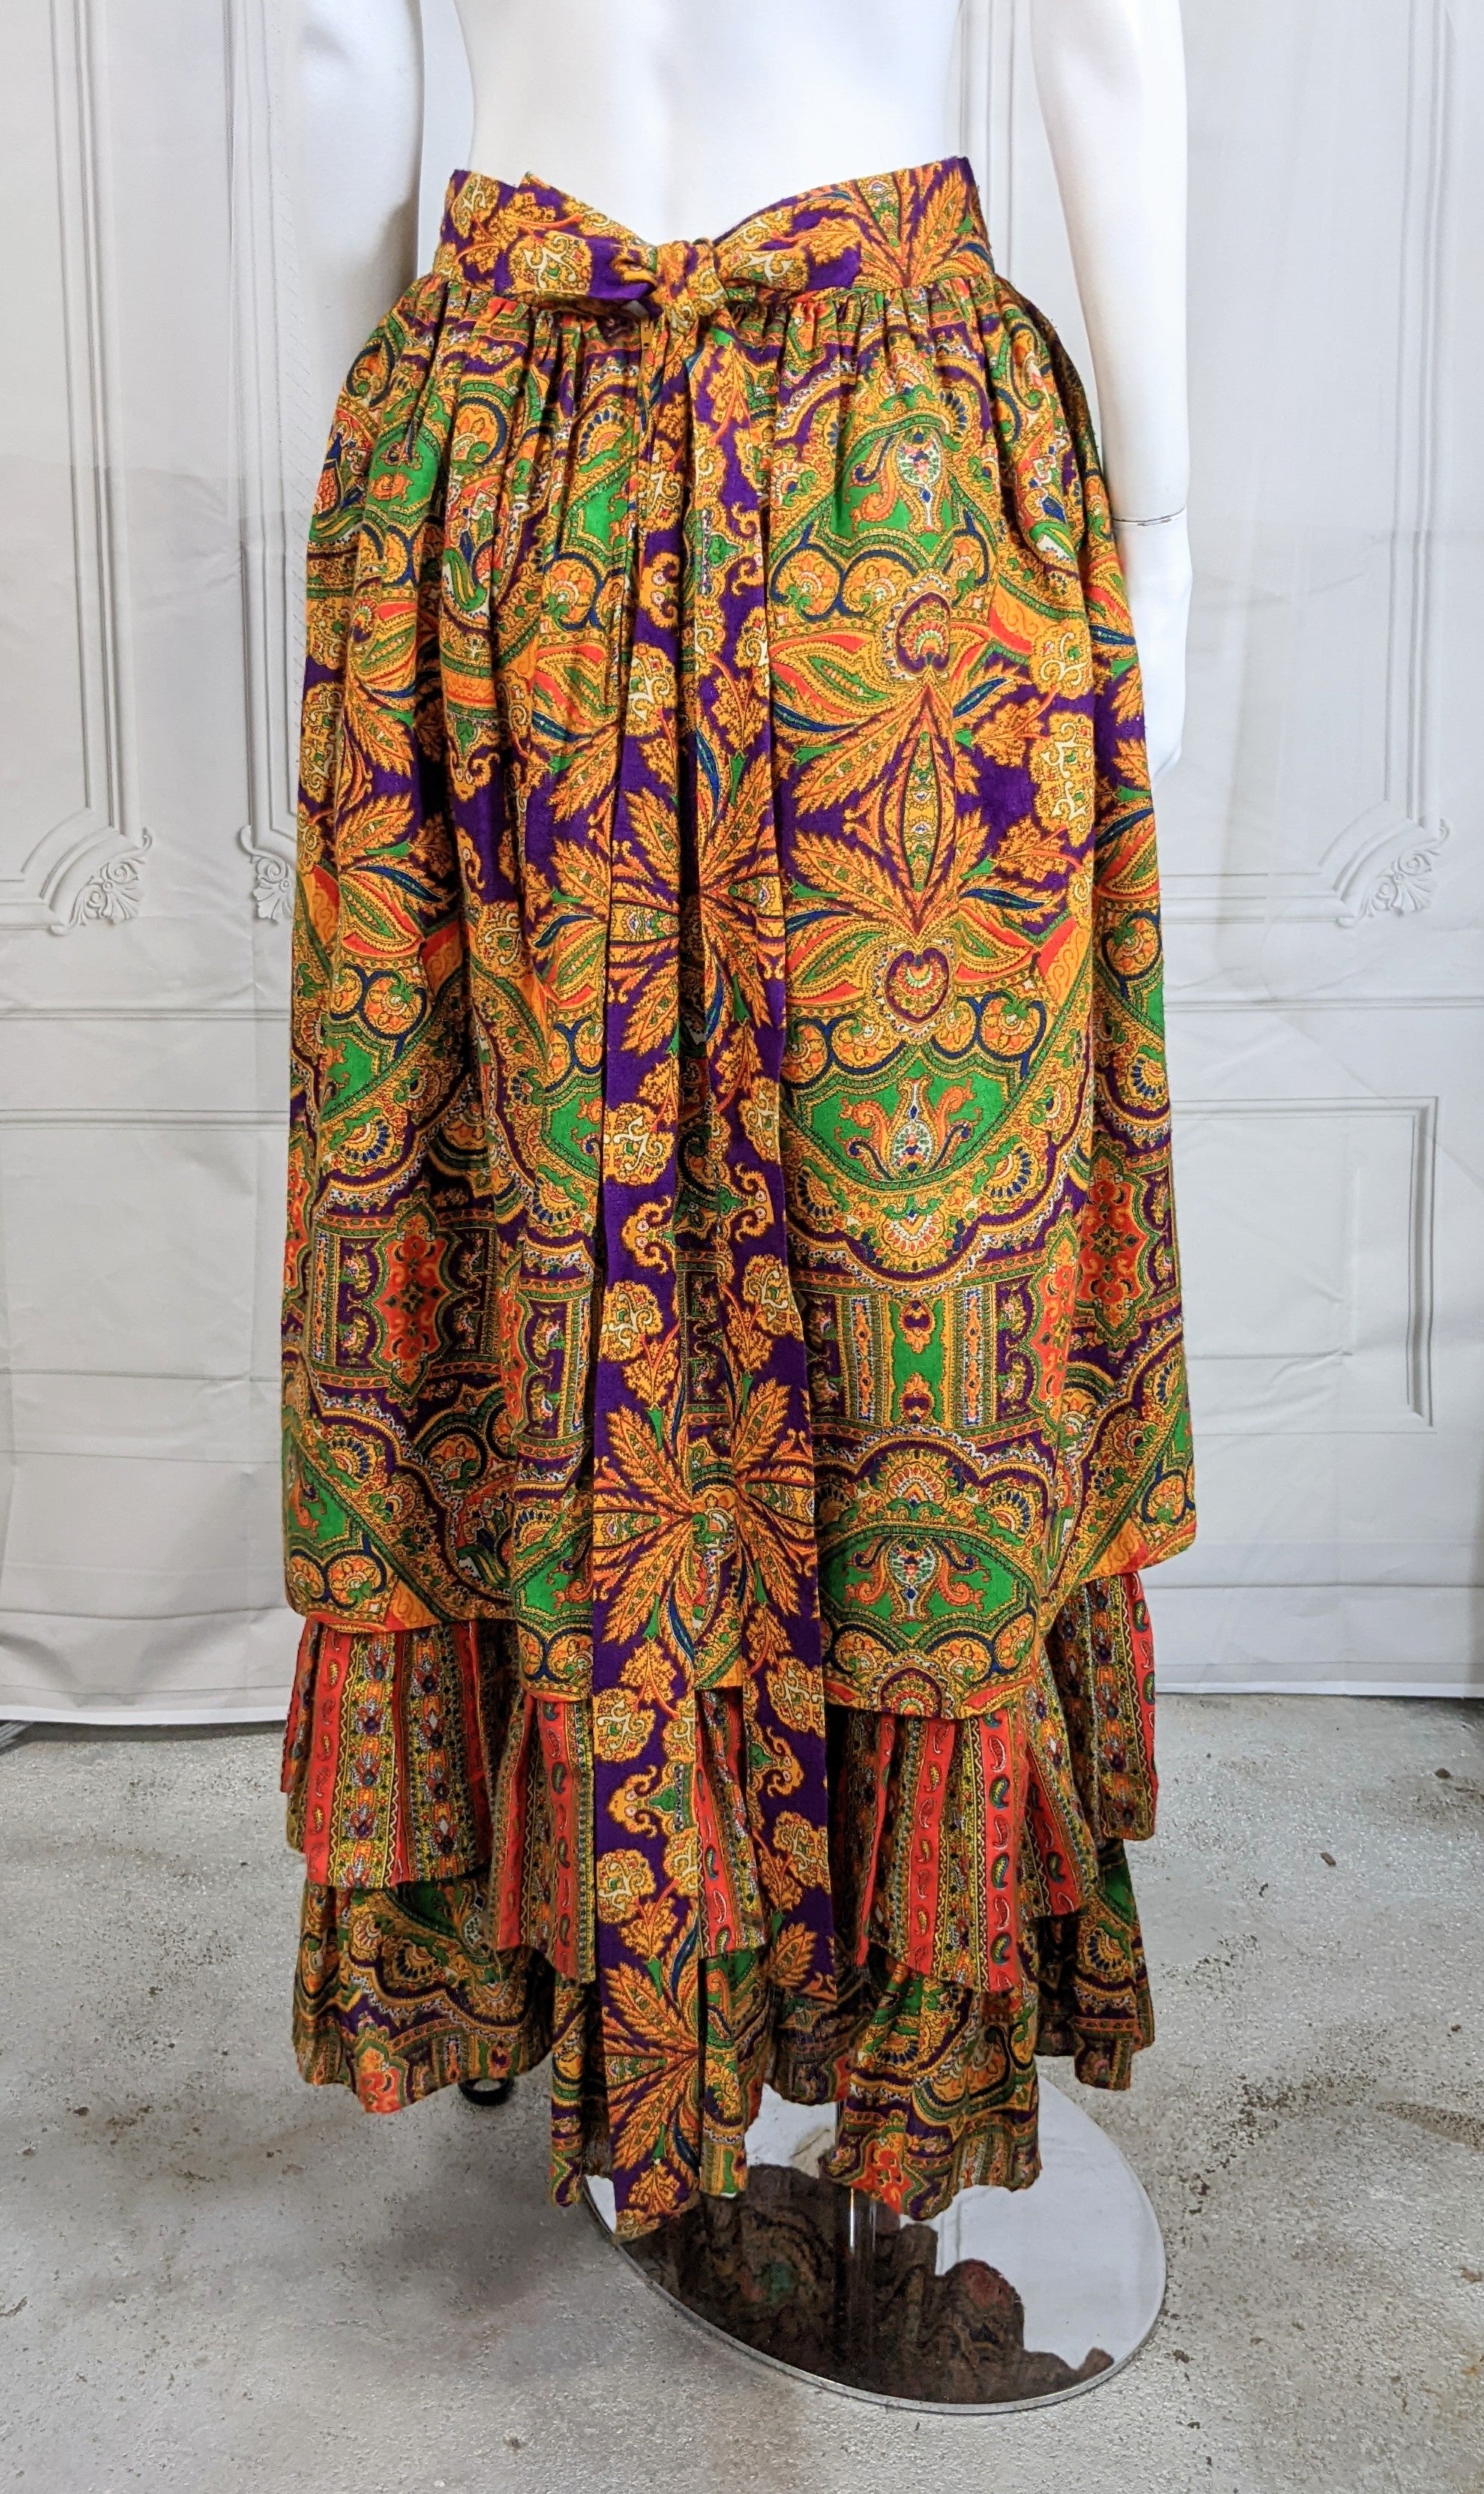 Folkloric Ruffled Skirt by Ellen Tracy circa 1970. Wonderfully colored vibrant paisley print in a dirndl shape over an attached petticoat with 2 rows of ruffles. The bottom ruffle matches the upper skirt and the center ruffle has a contrasting